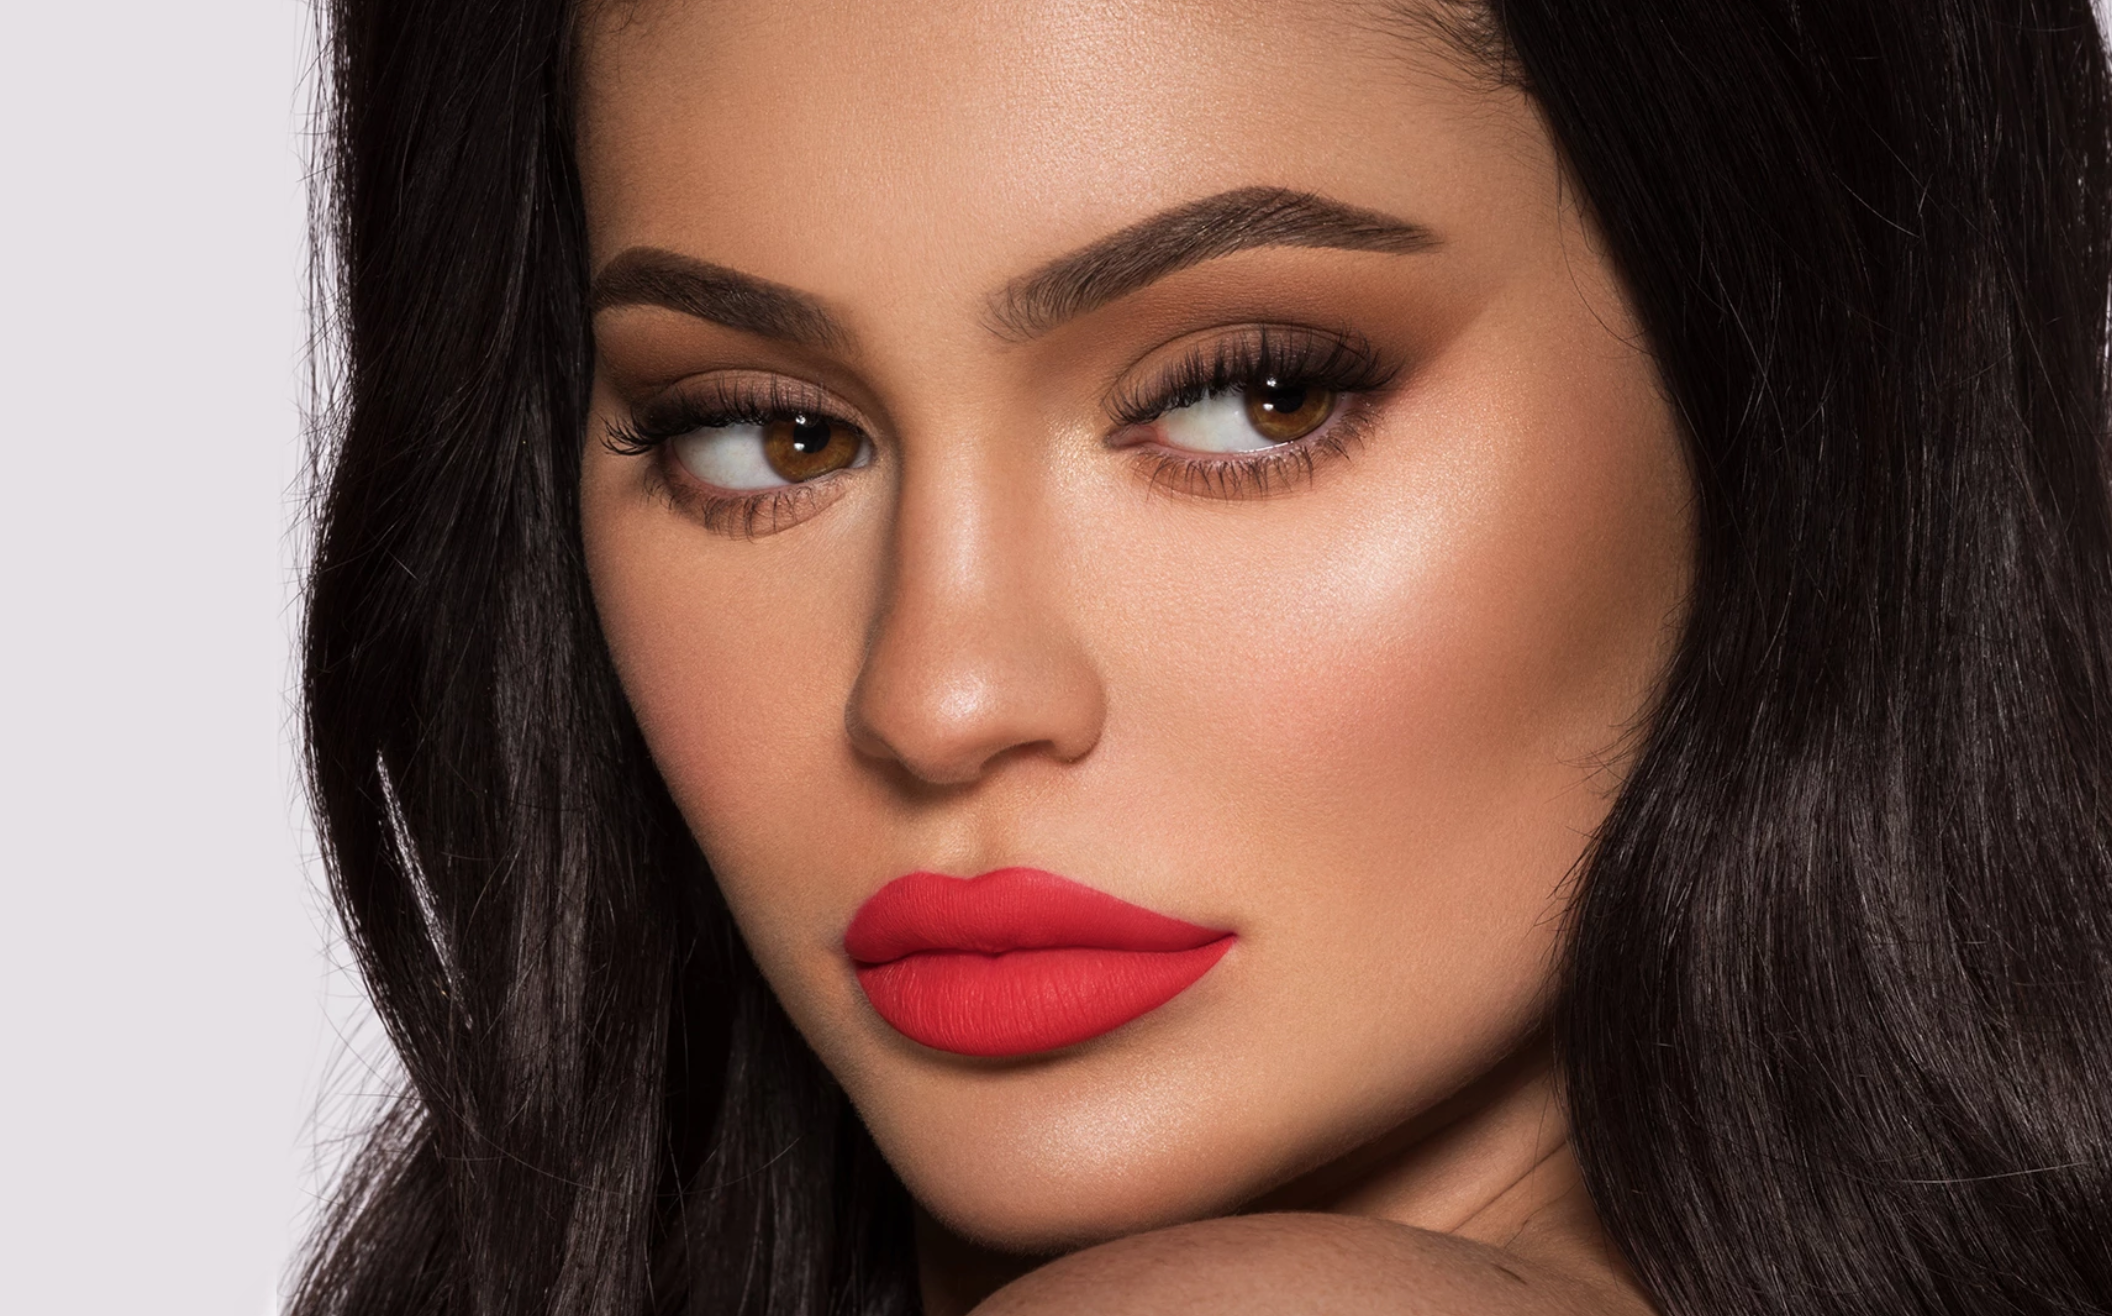 A close-up photograph of Kylie Jenner wearing products from her namesake Kylie Cosmetics brand.